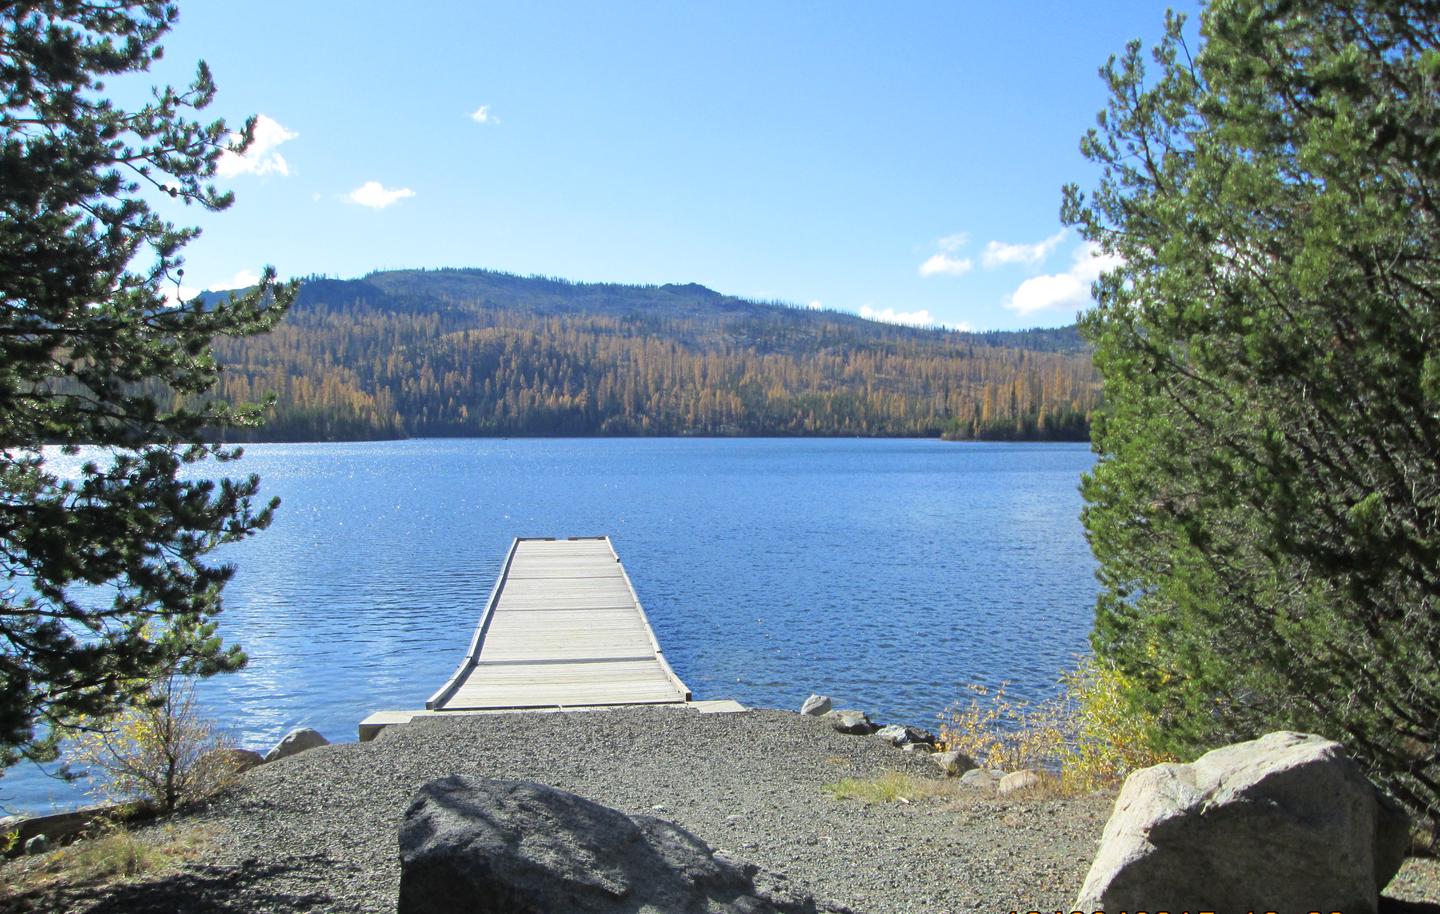 wooden dock stretching into the water with golden fall colors on the distant treesSouth dock at Olive Lake